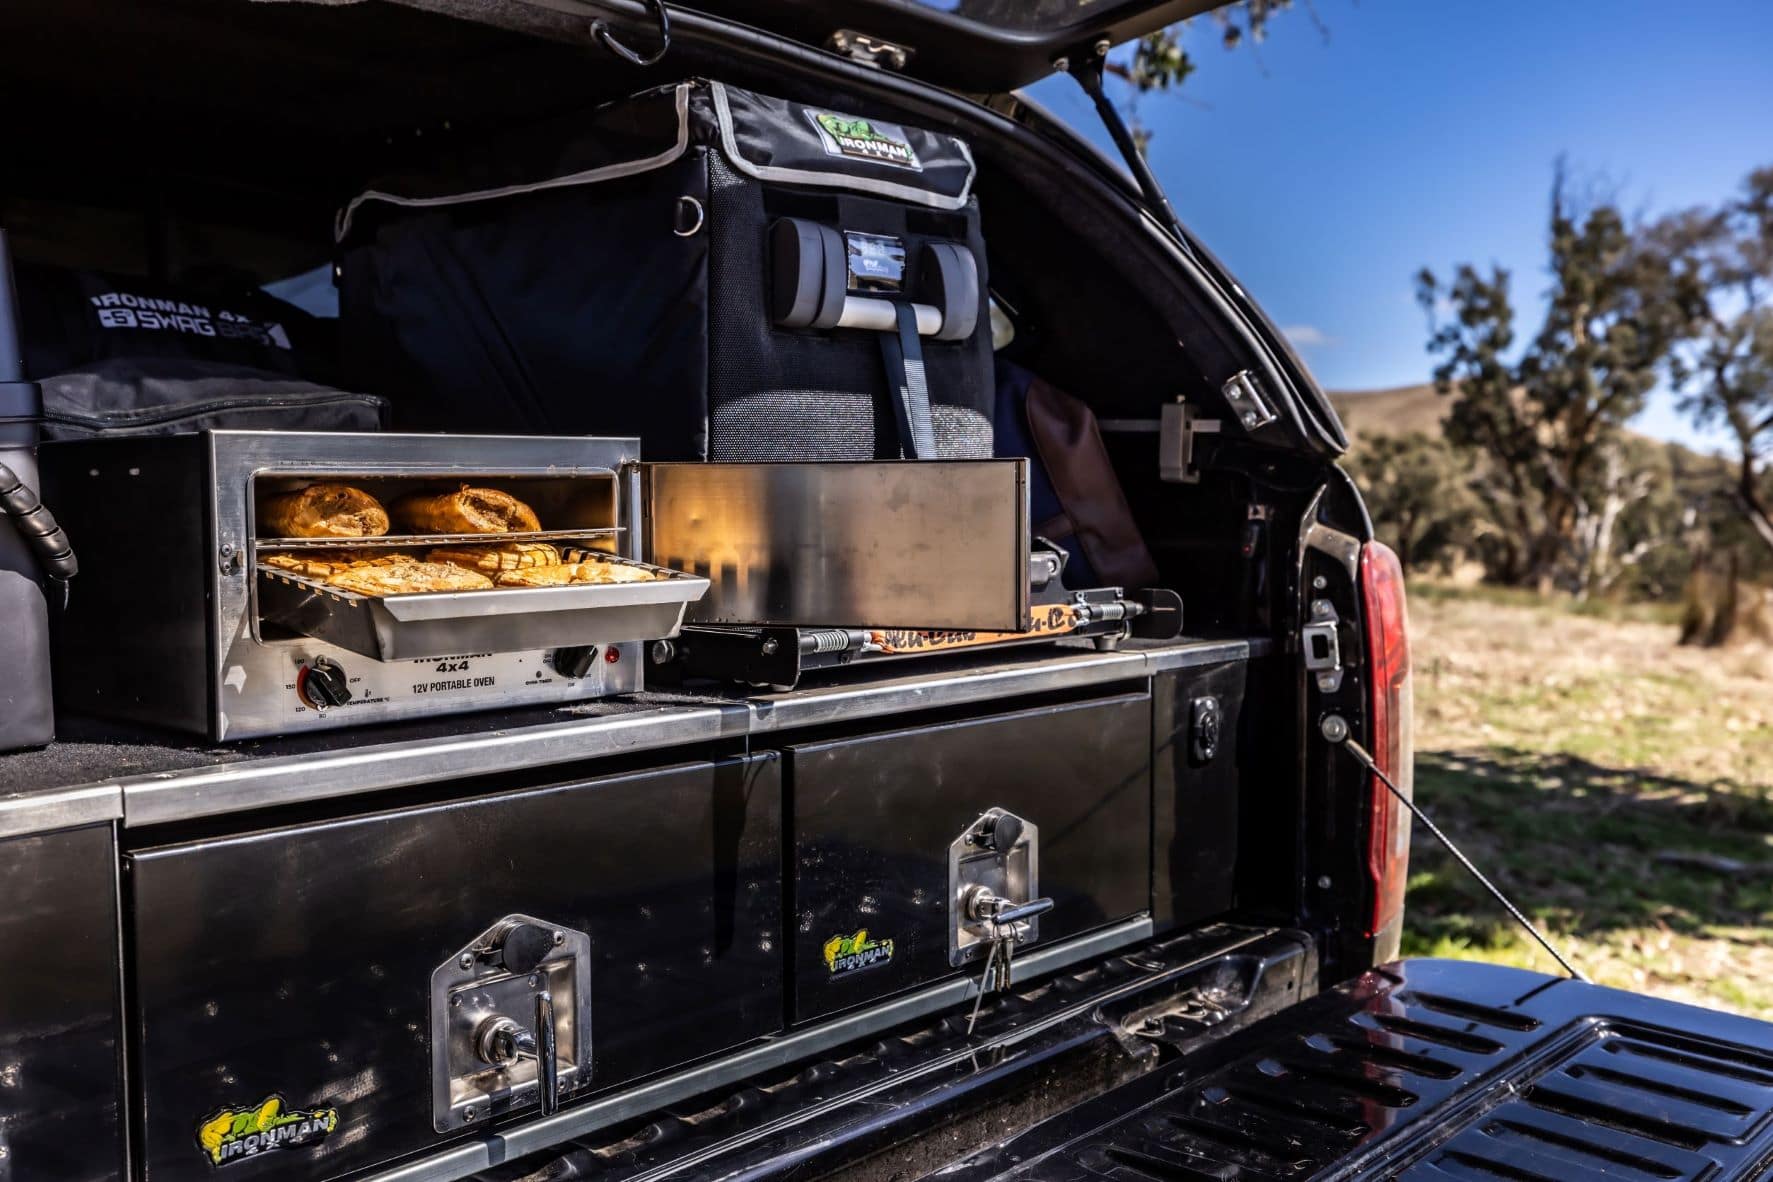 Portable Oven On The Back Of The Car — 4x4 Accessories in Whitsundays, QLD